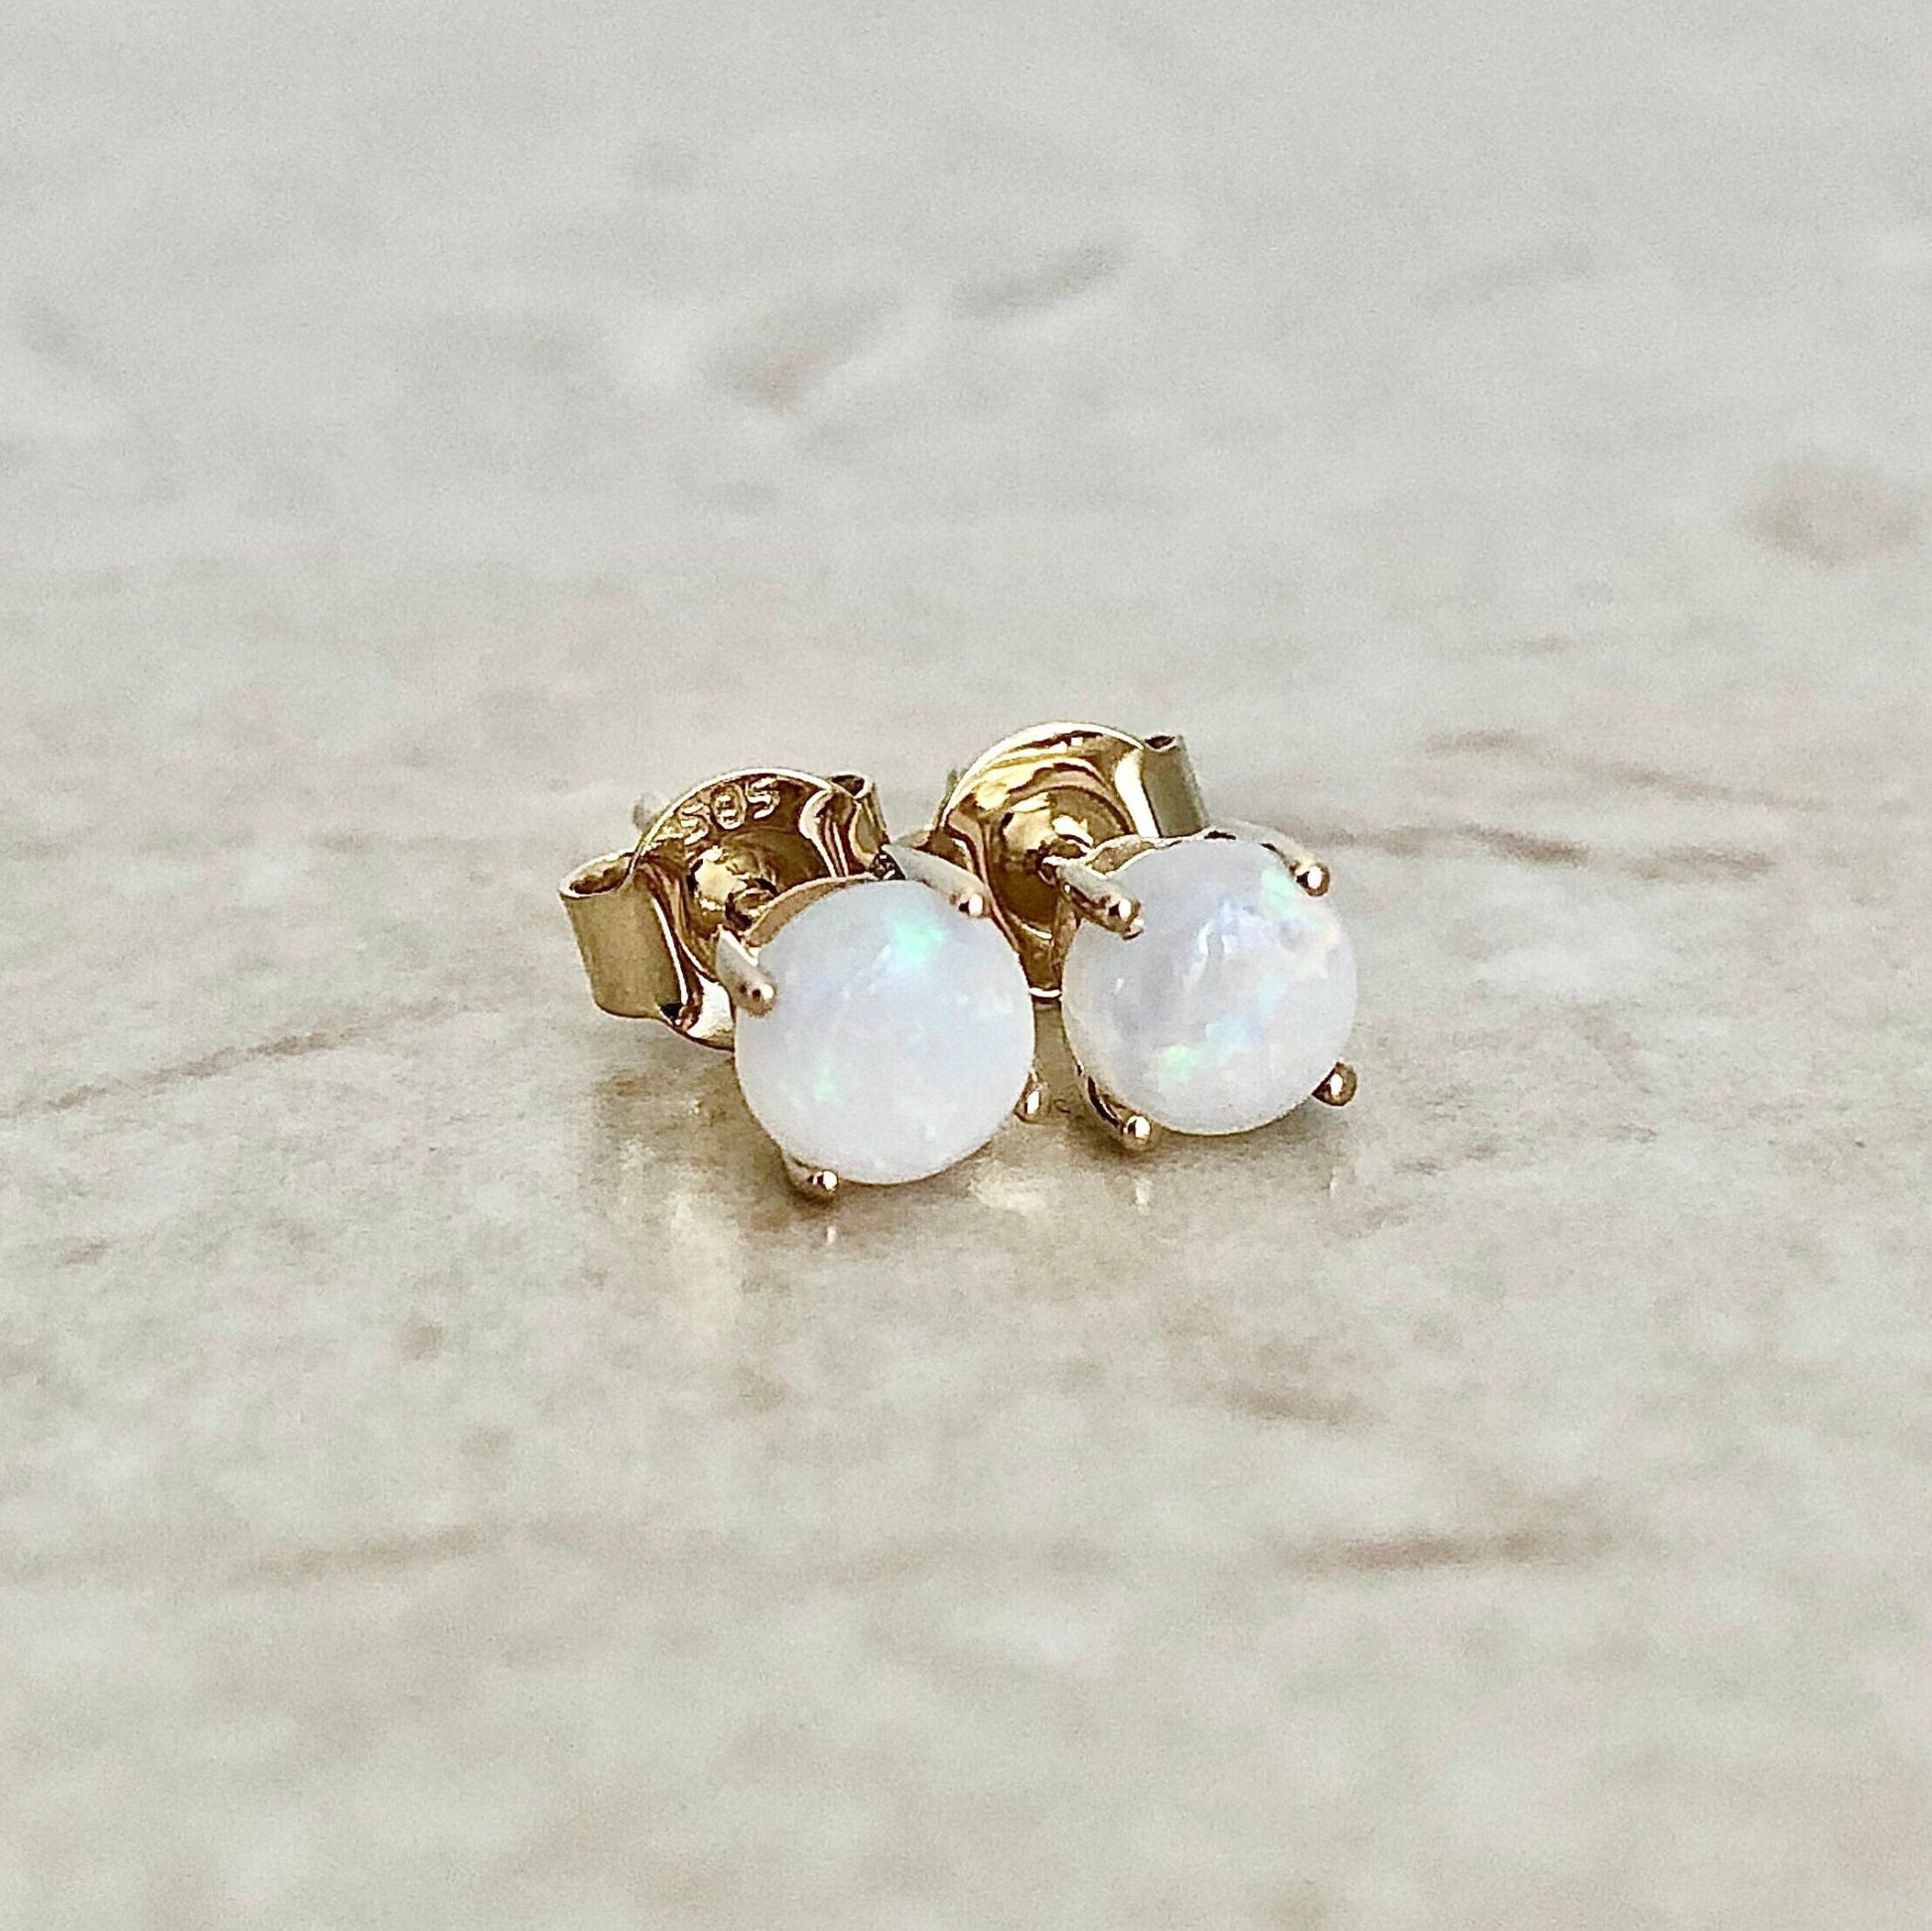 14K Round Opal Stud Earrings - Yellow Gold Opal Studs - Gold Opal Earrings -Genuine Opal-Round Opal Earrings-October Birthstone Gift For Her